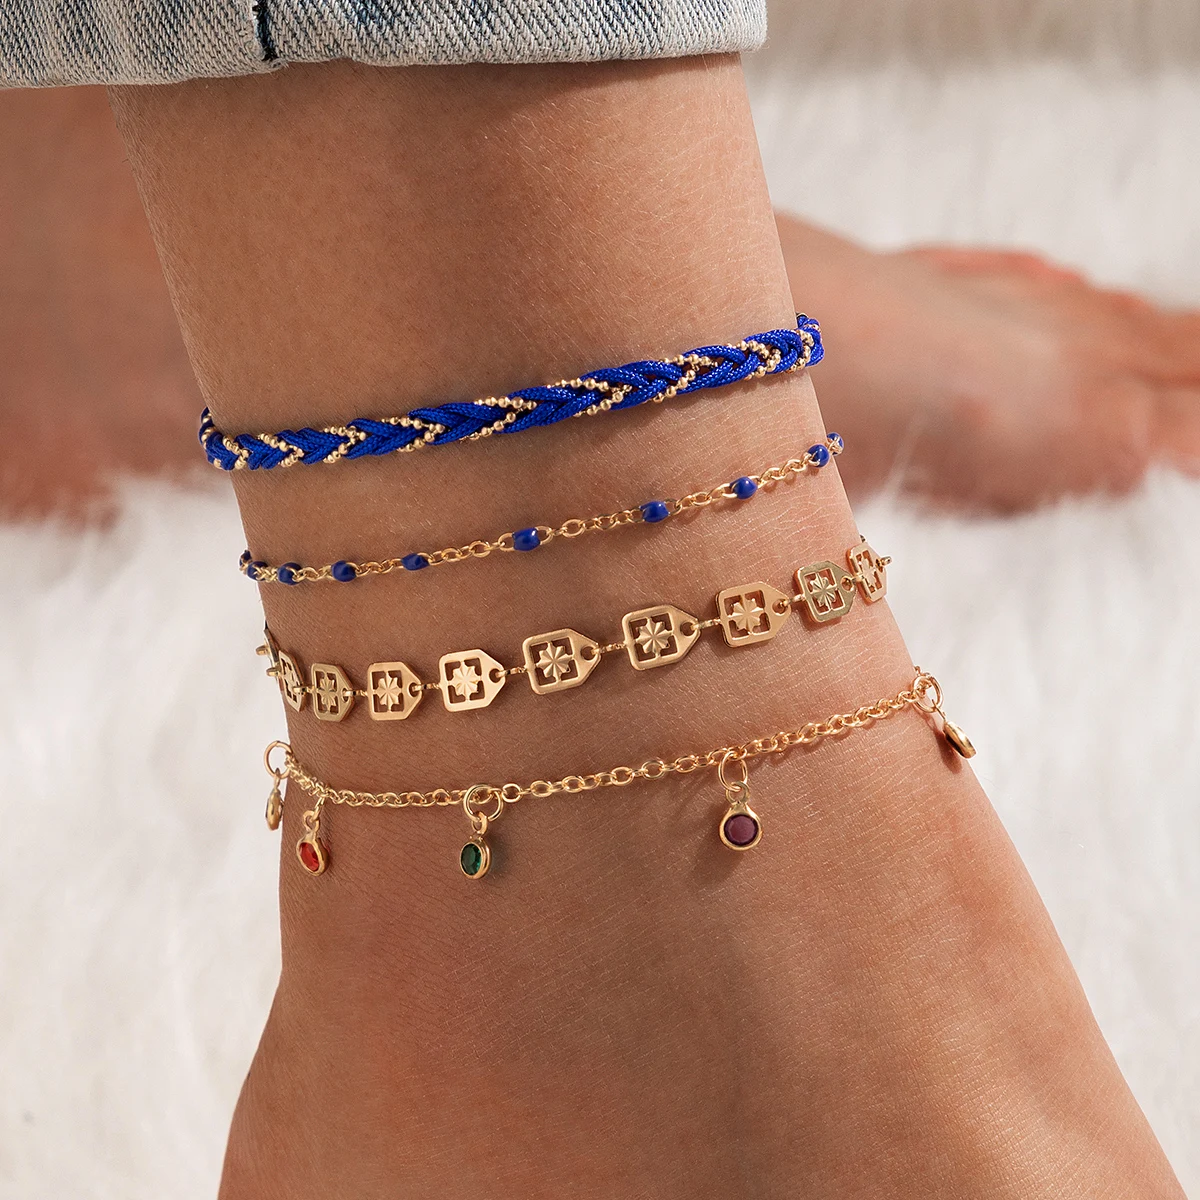 

docona 4pcs/sets Bohemia Handmade Rope Bead Anklets for Women Men Charms Cystal Tassel Barefoot Sandals Feet Chain Jewelry 16835